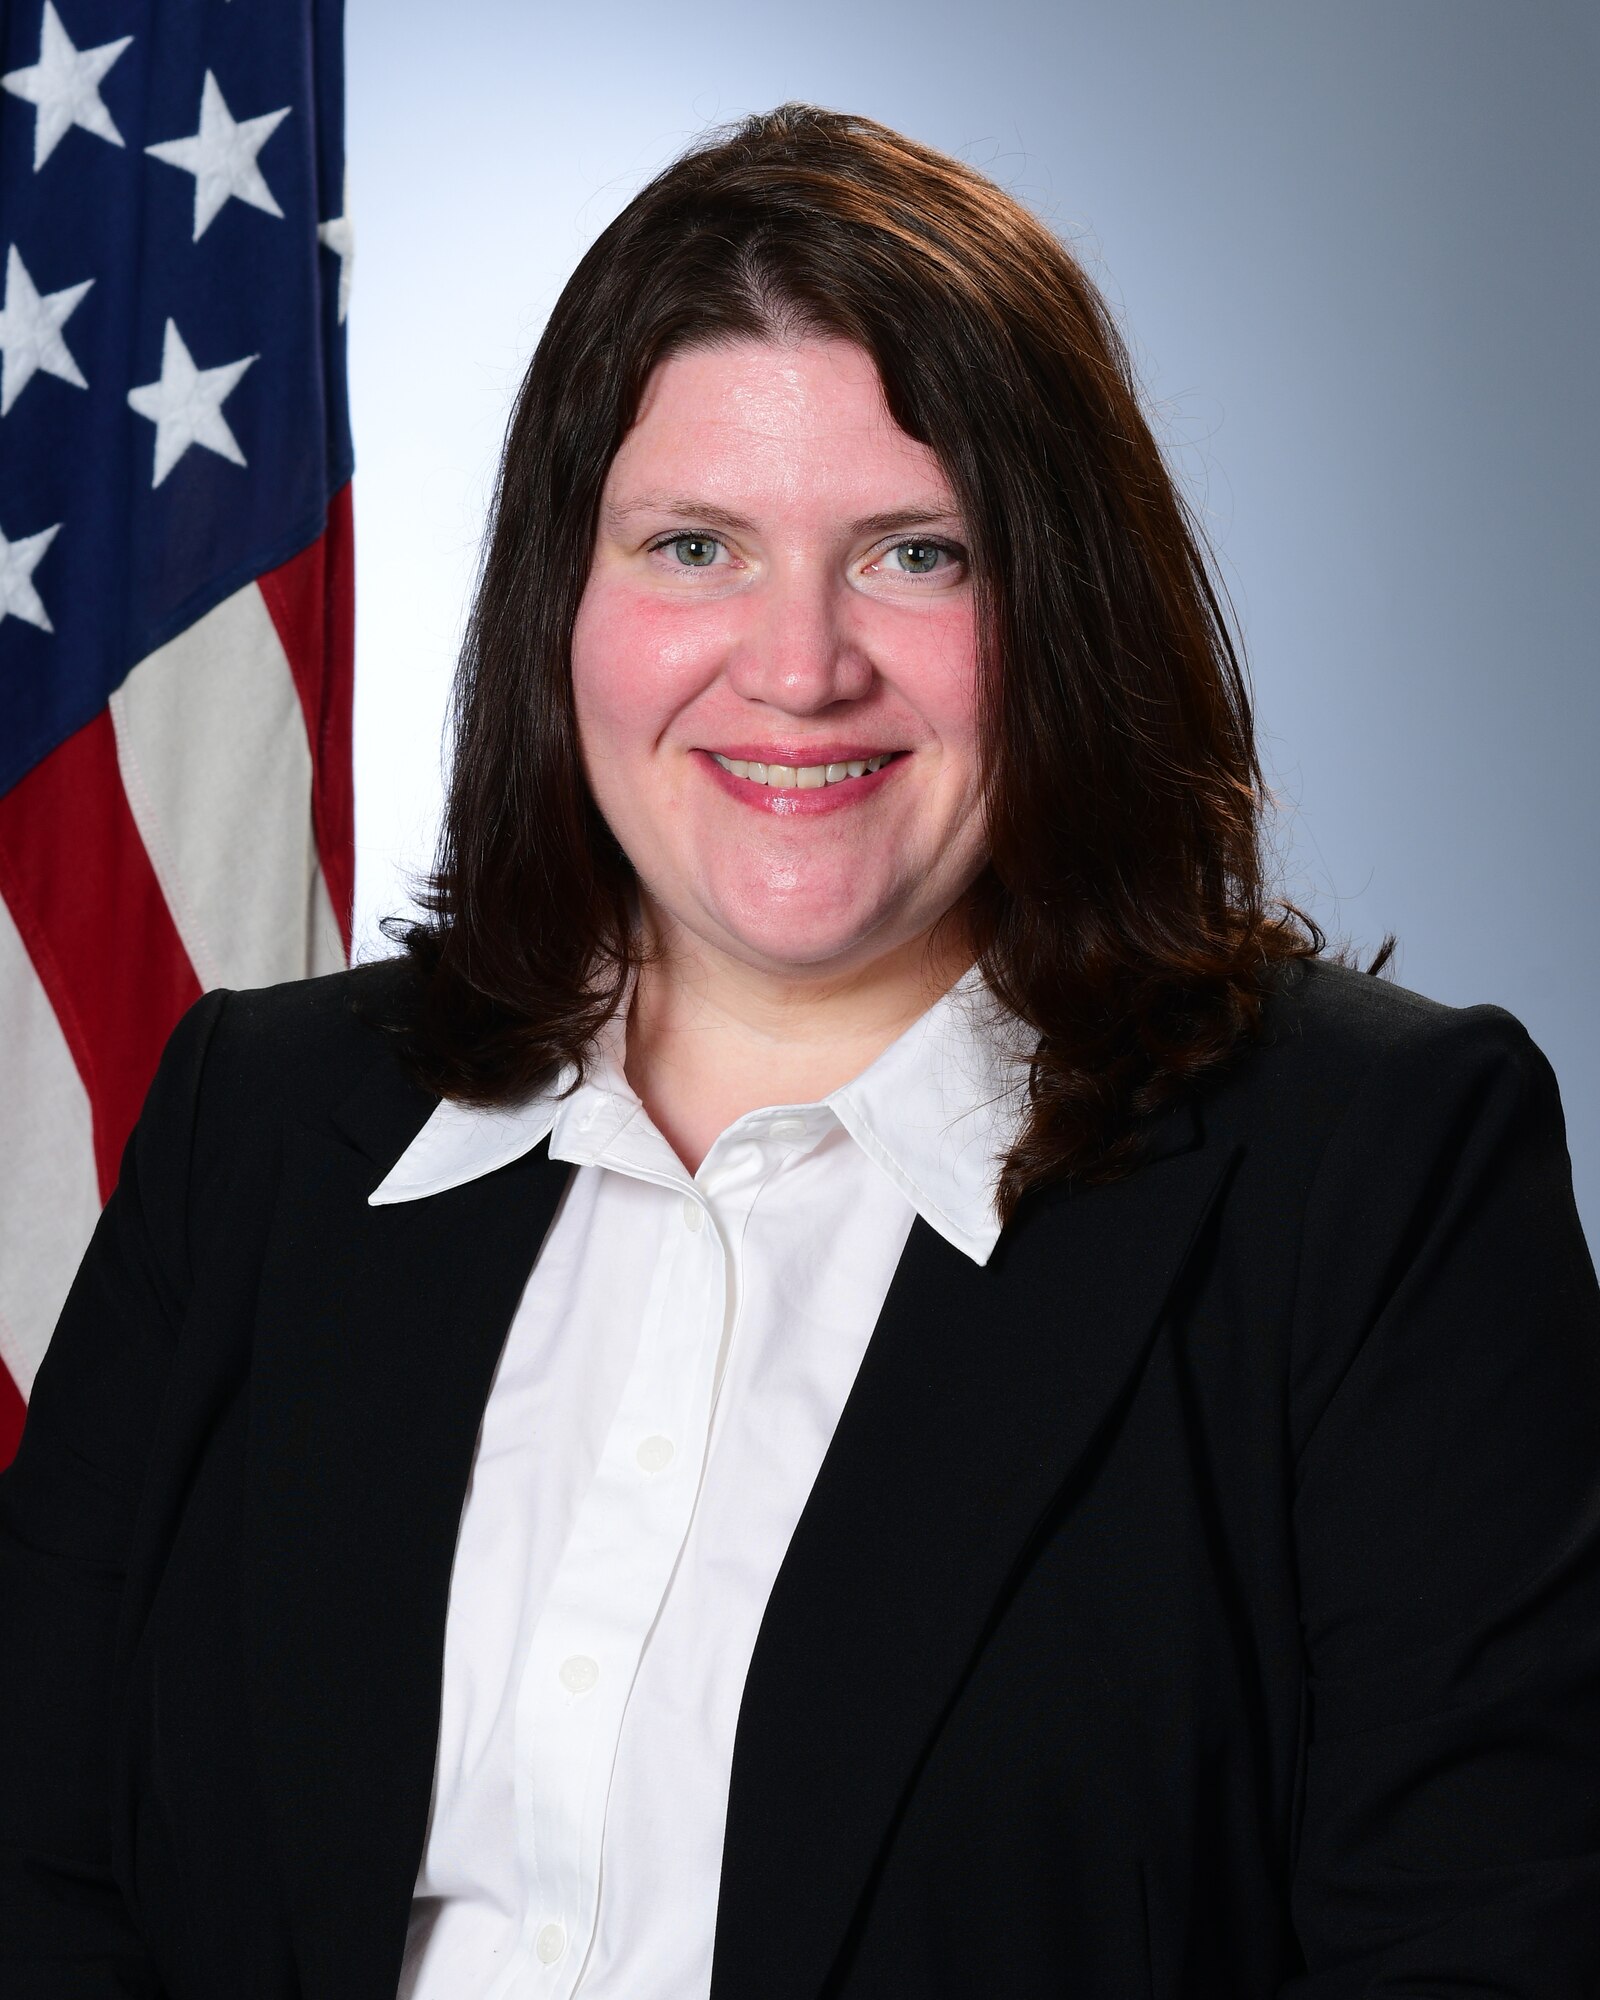 Shelly Trimble is the Sexual Assault Response Coordinator for the 910th Airlift Wing based out of Youngstown Air Reserve Station, Ohio.